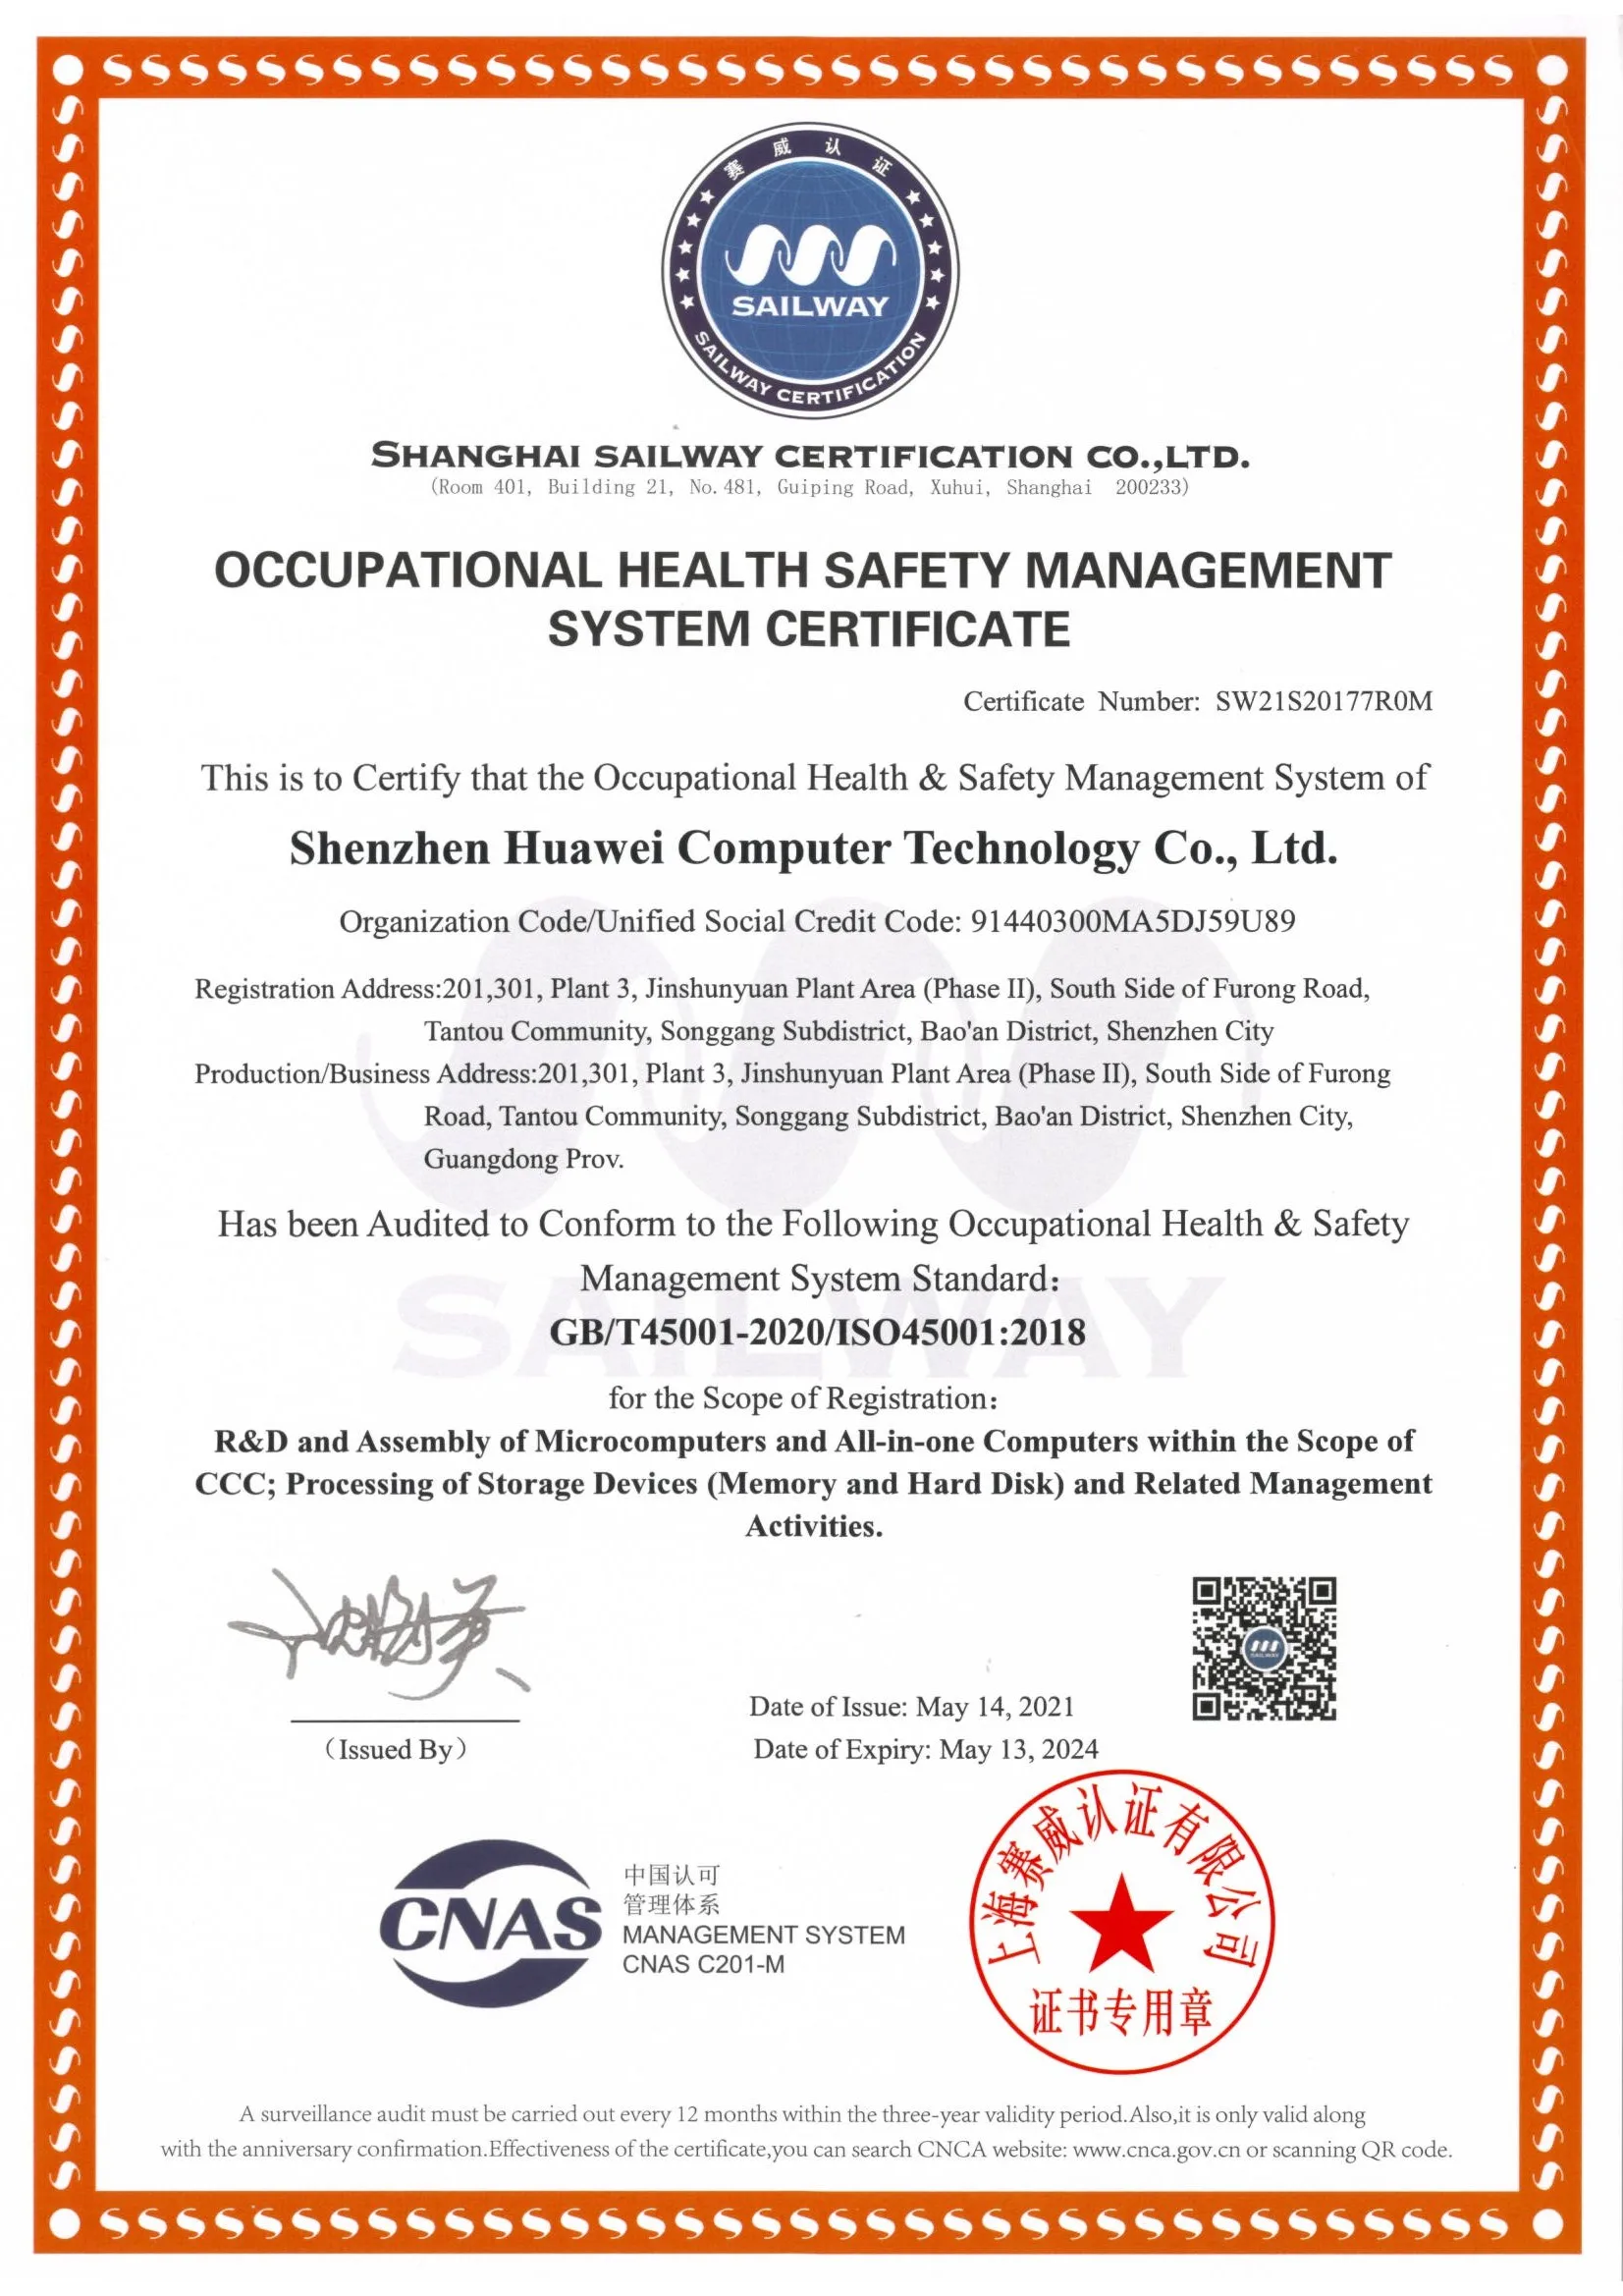 ISO 45001